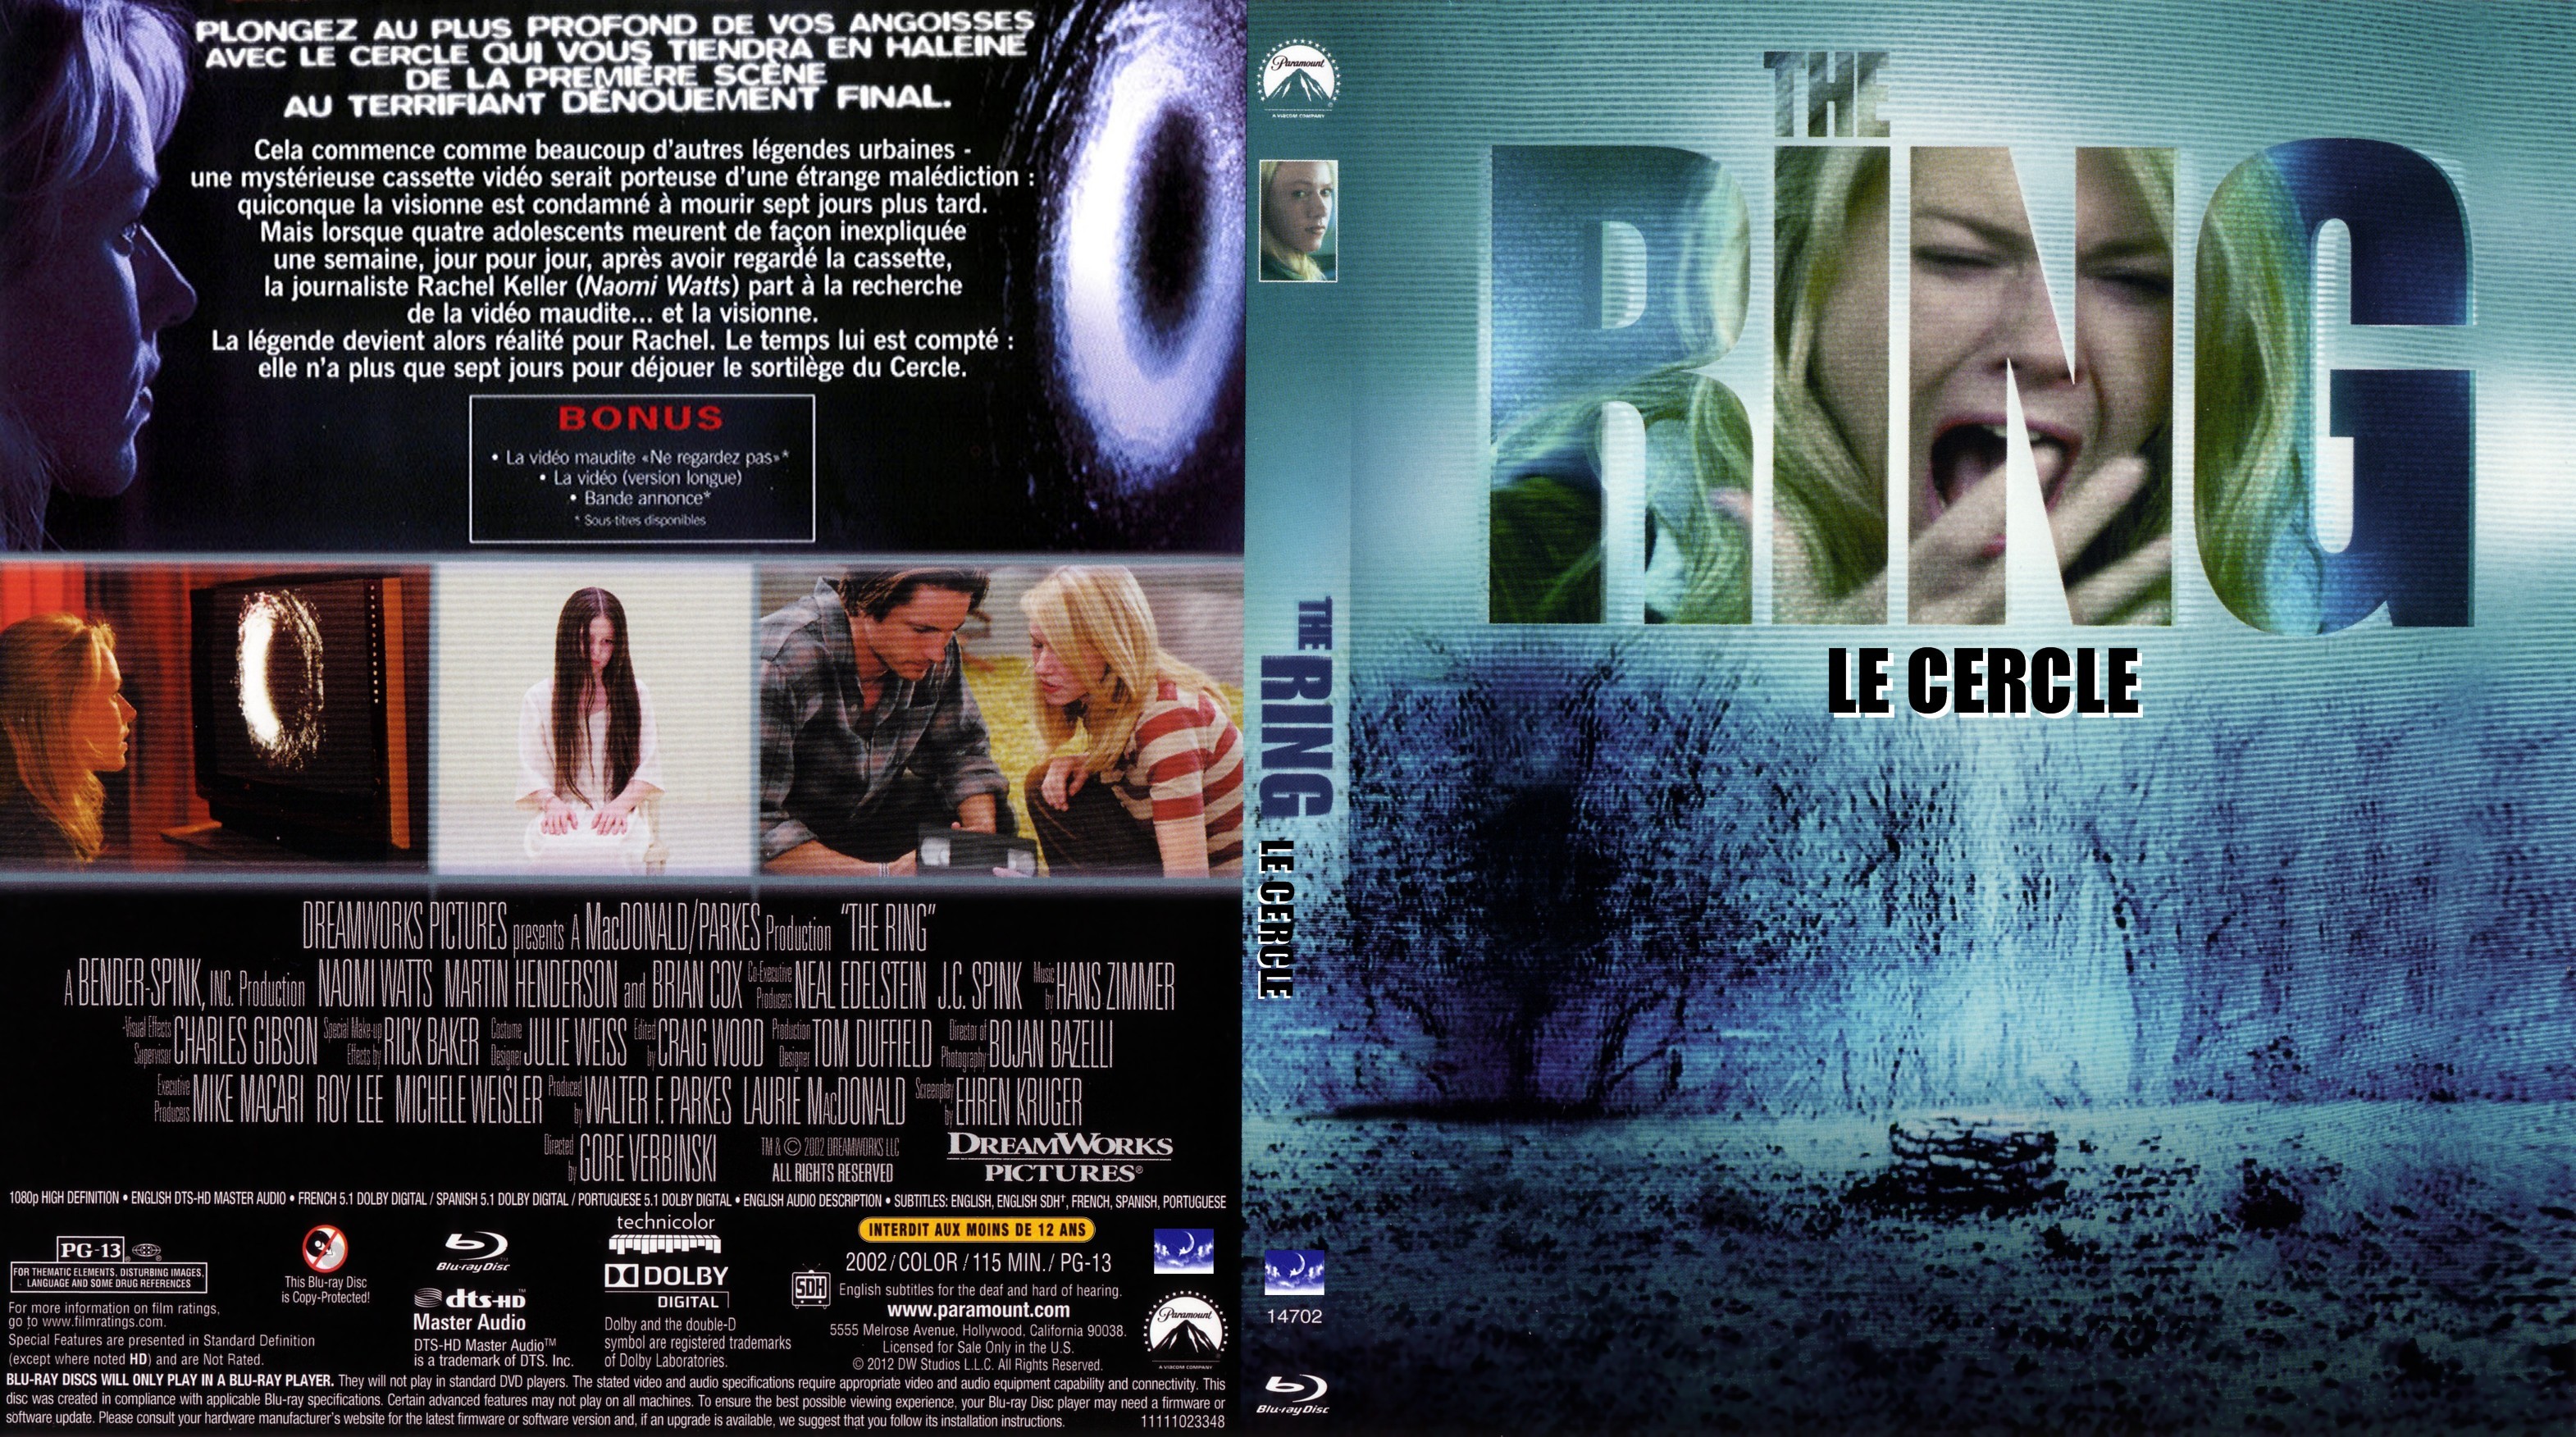 Jaquette DVD The ring - Le cercle custom (BLU-RAY)